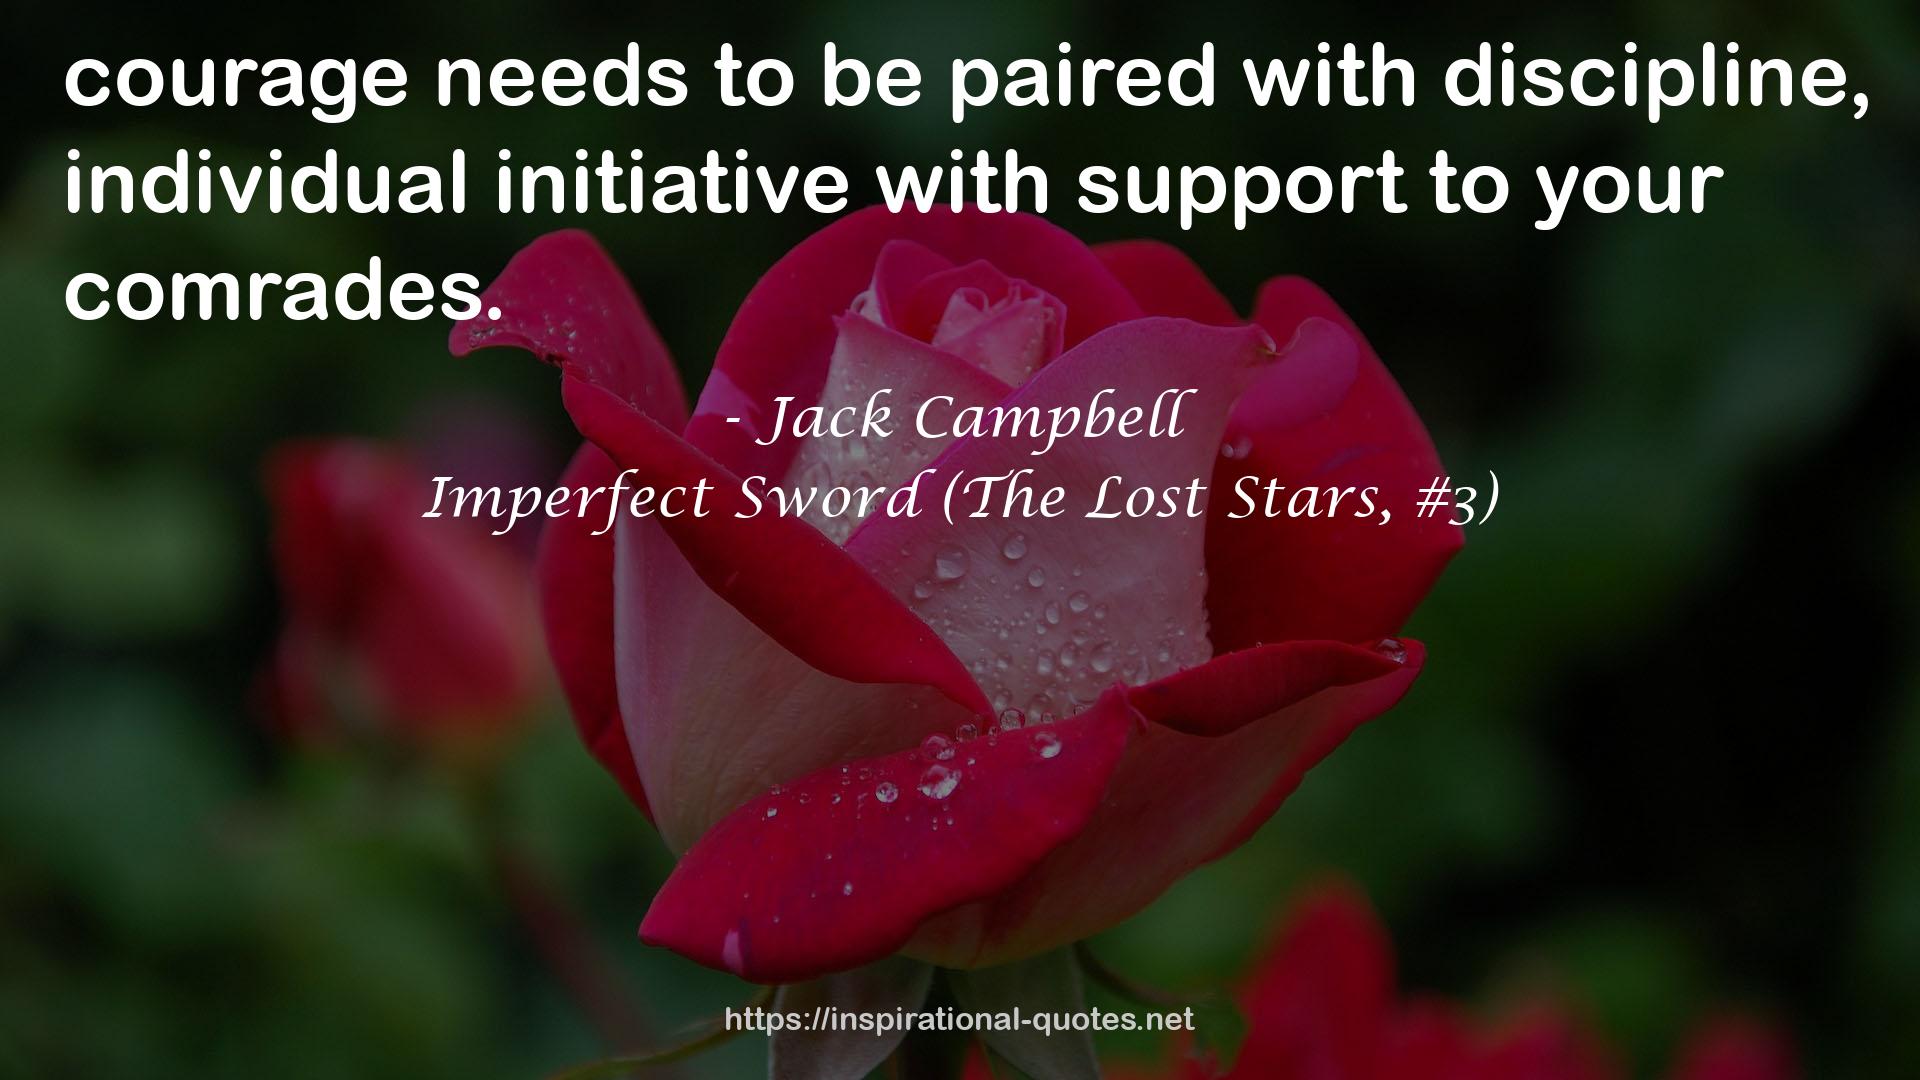 Imperfect Sword (The Lost Stars, #3) QUOTES